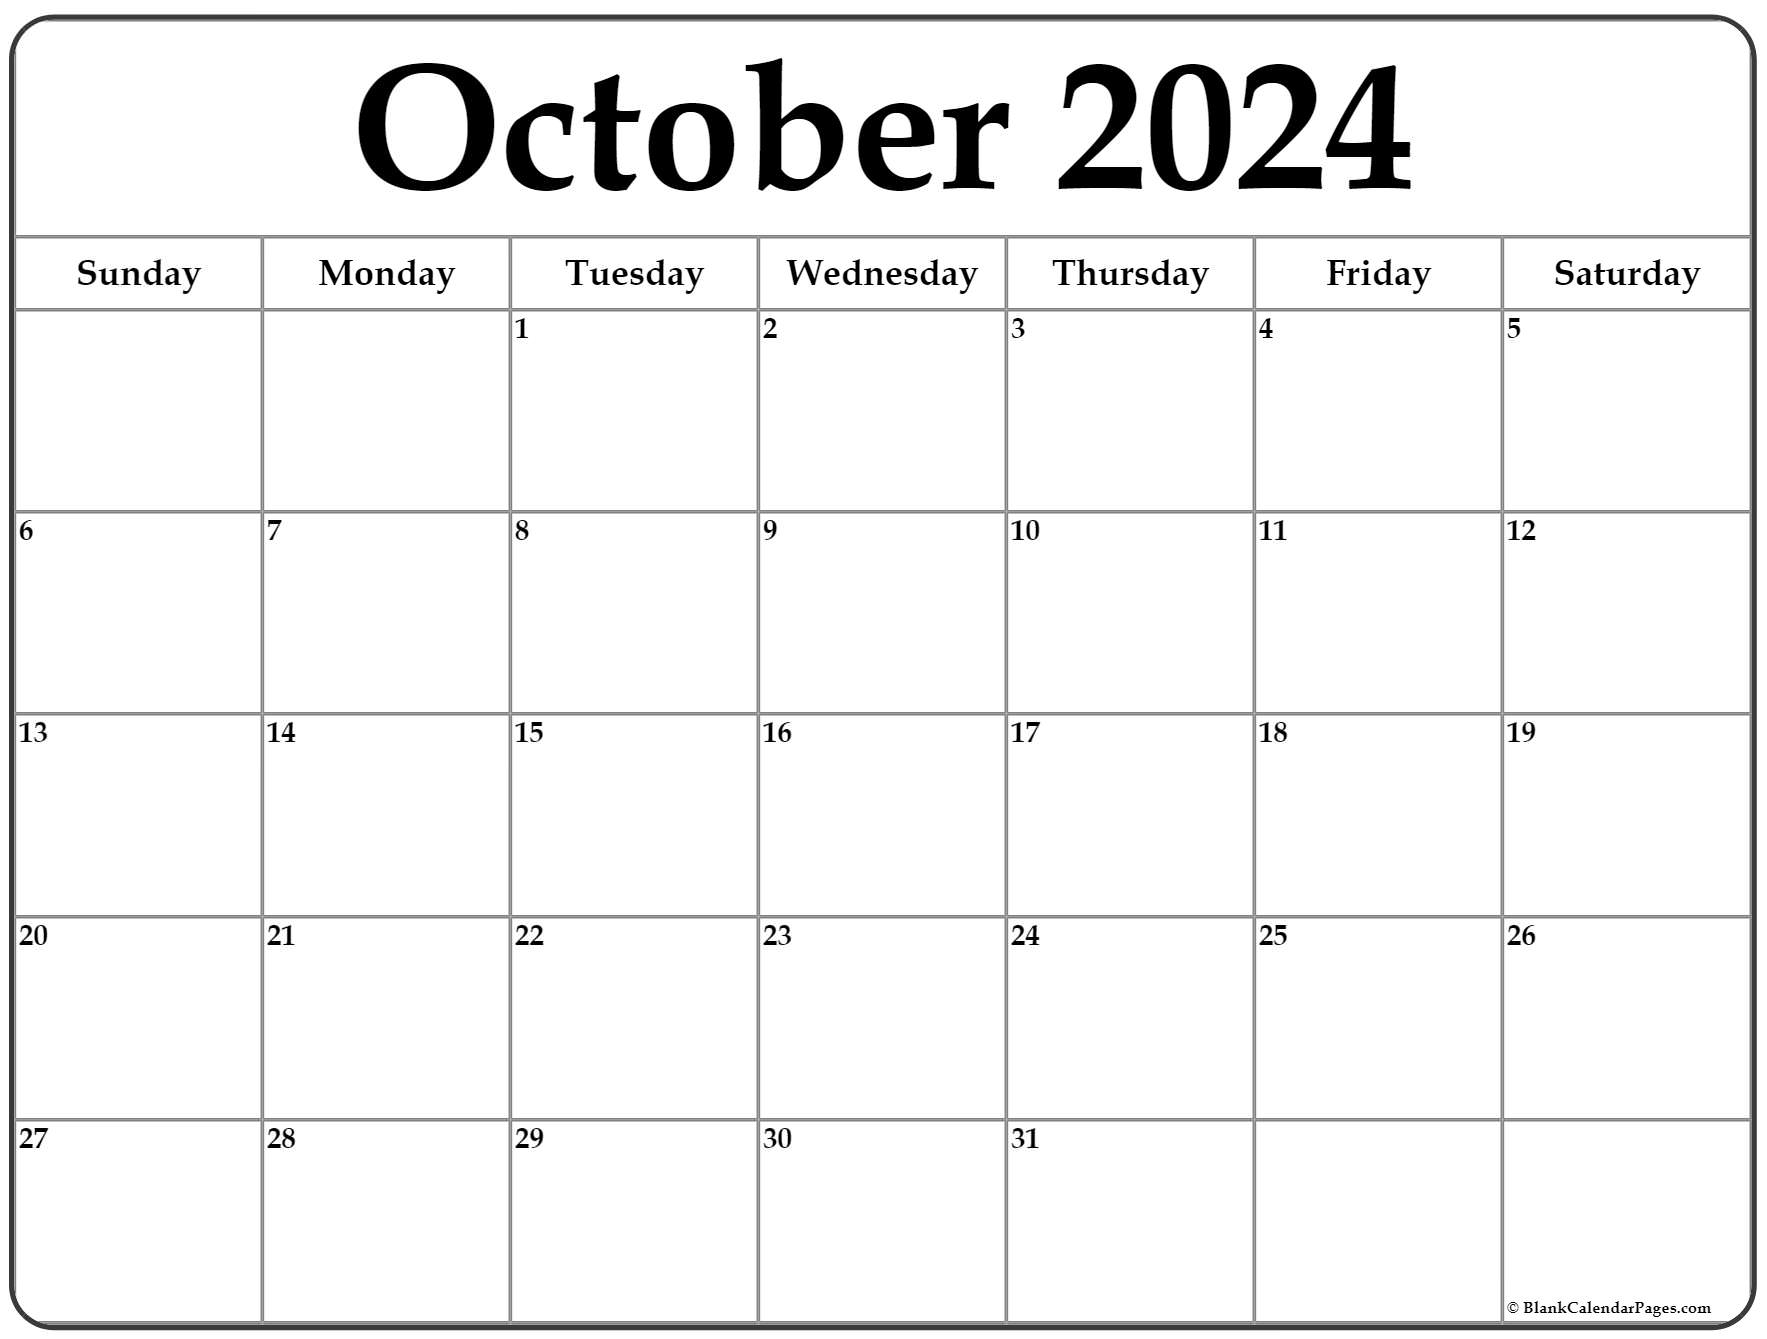 October 26 2024 Day Of The Week Calendar channa chelsey